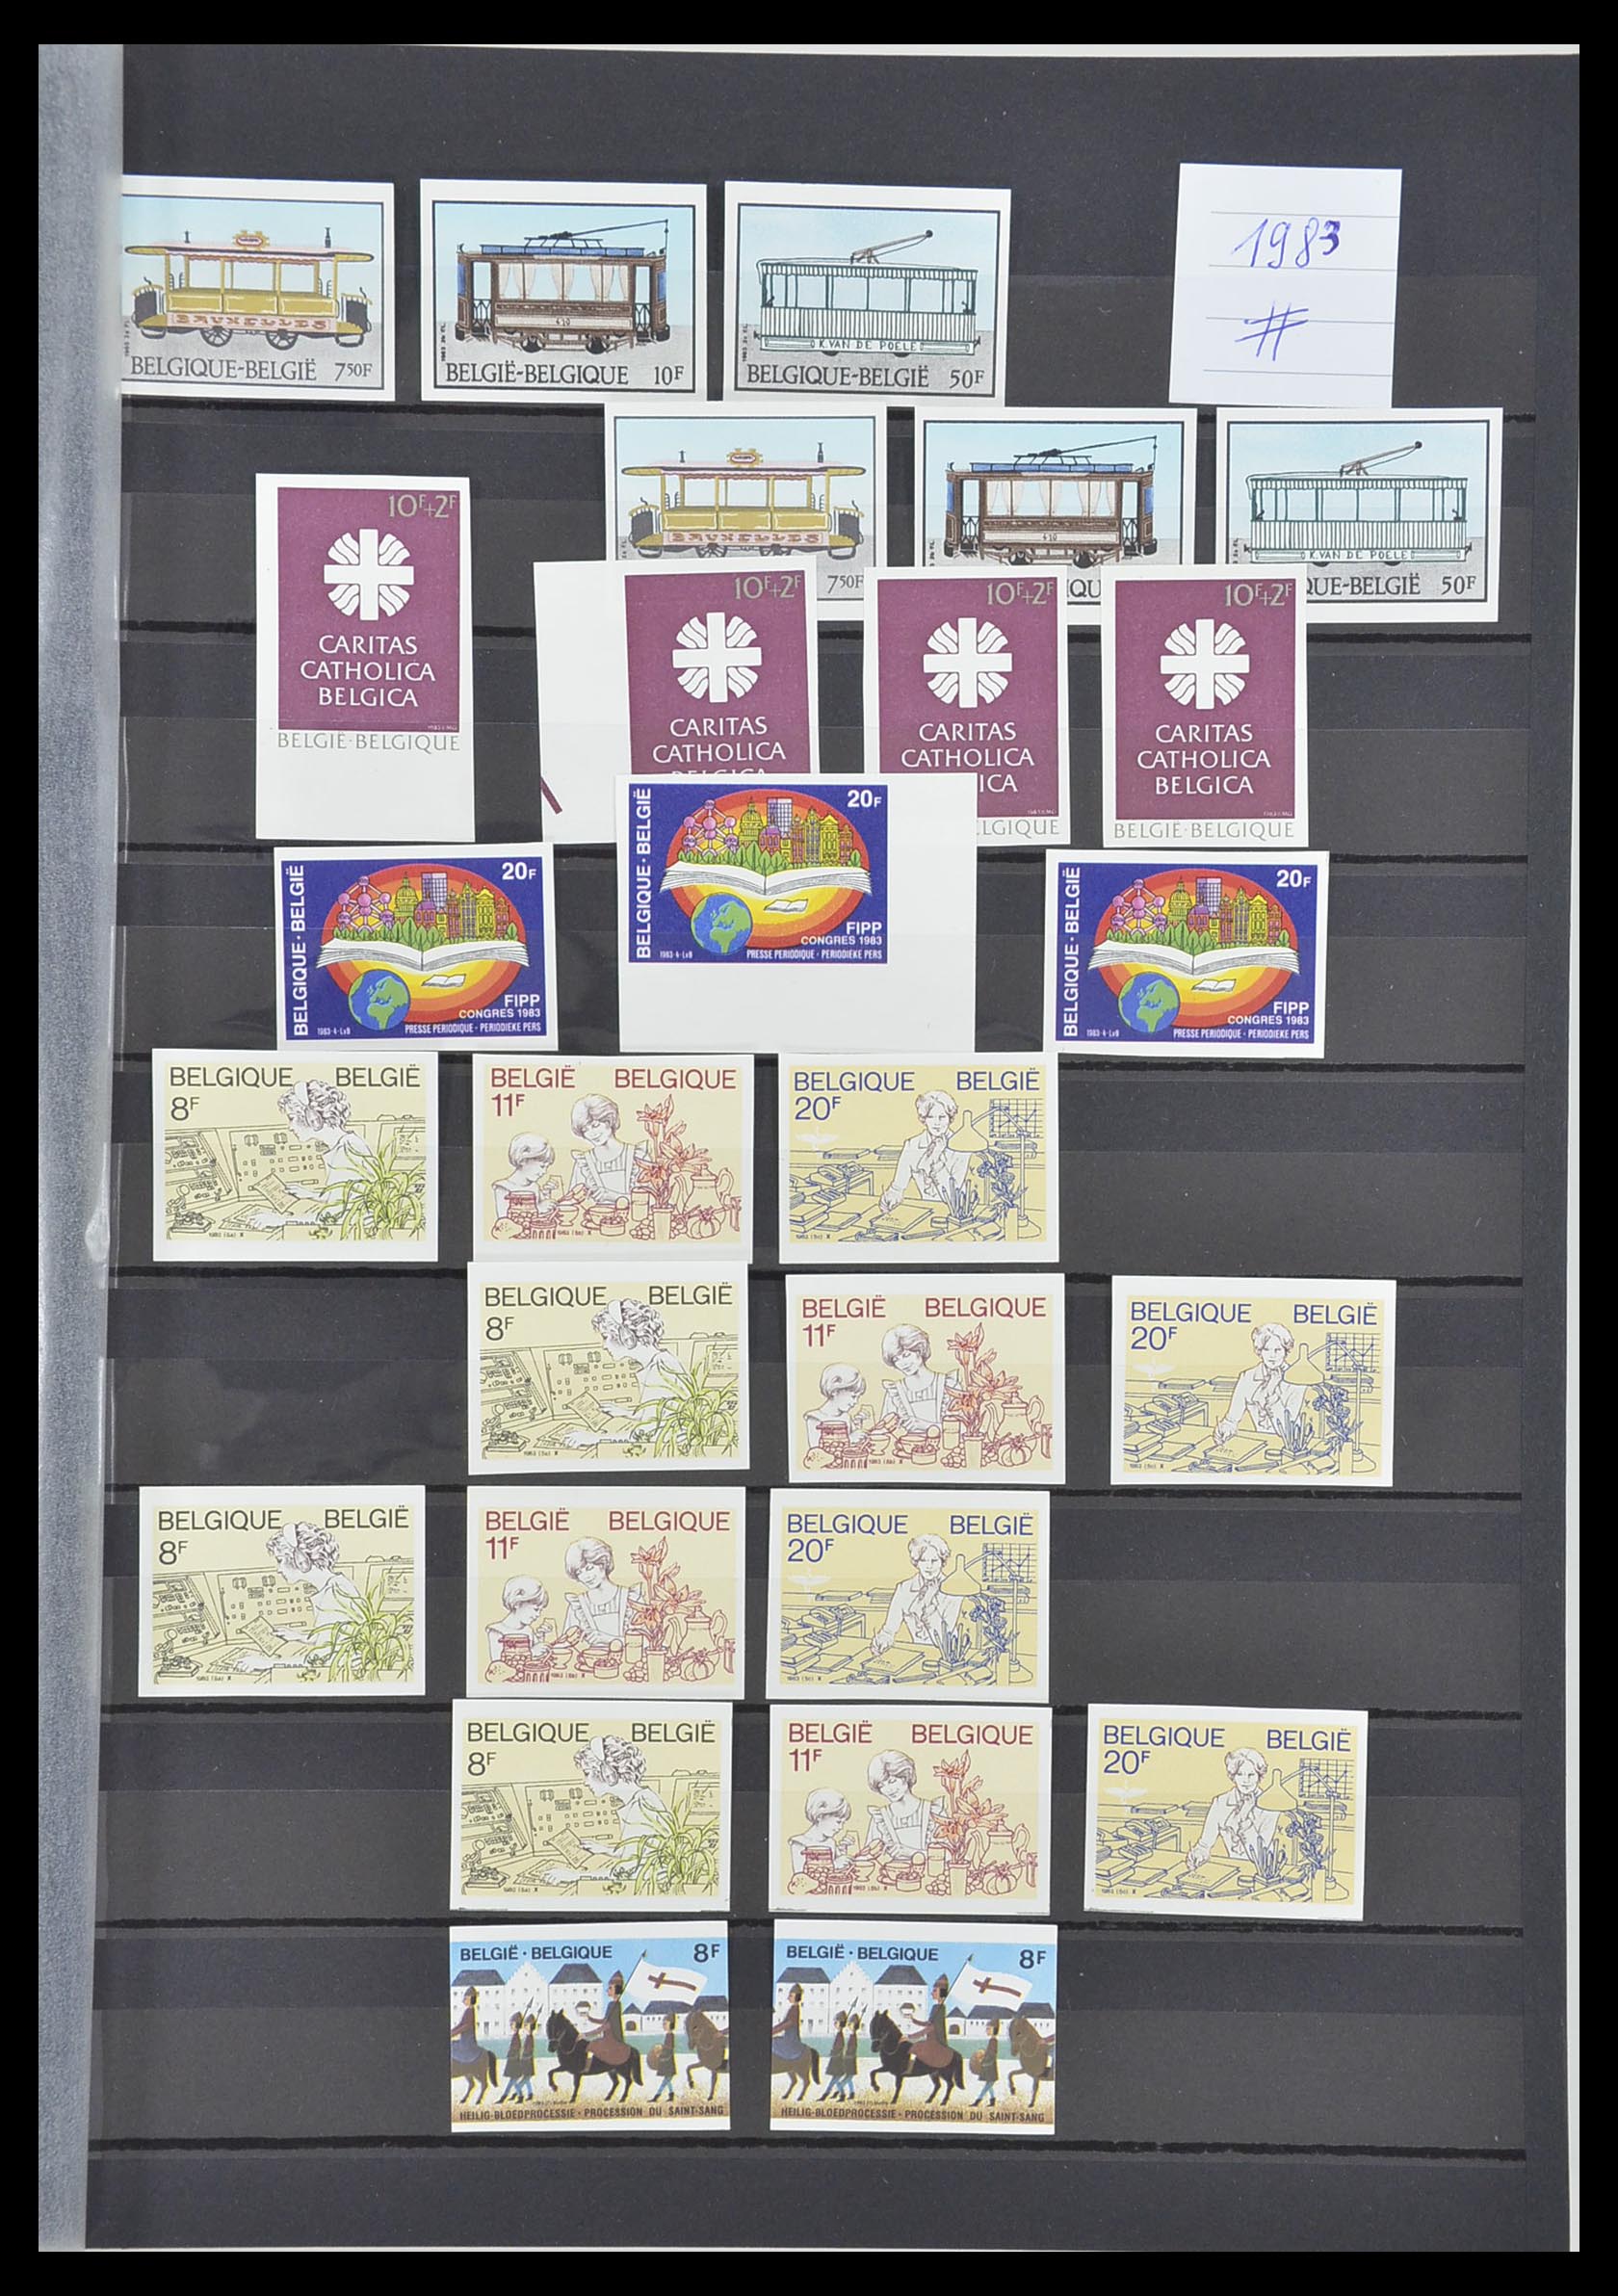 33765 098 - Stamp collection 33765 Belgium IMPERFORATED 1960-2019!